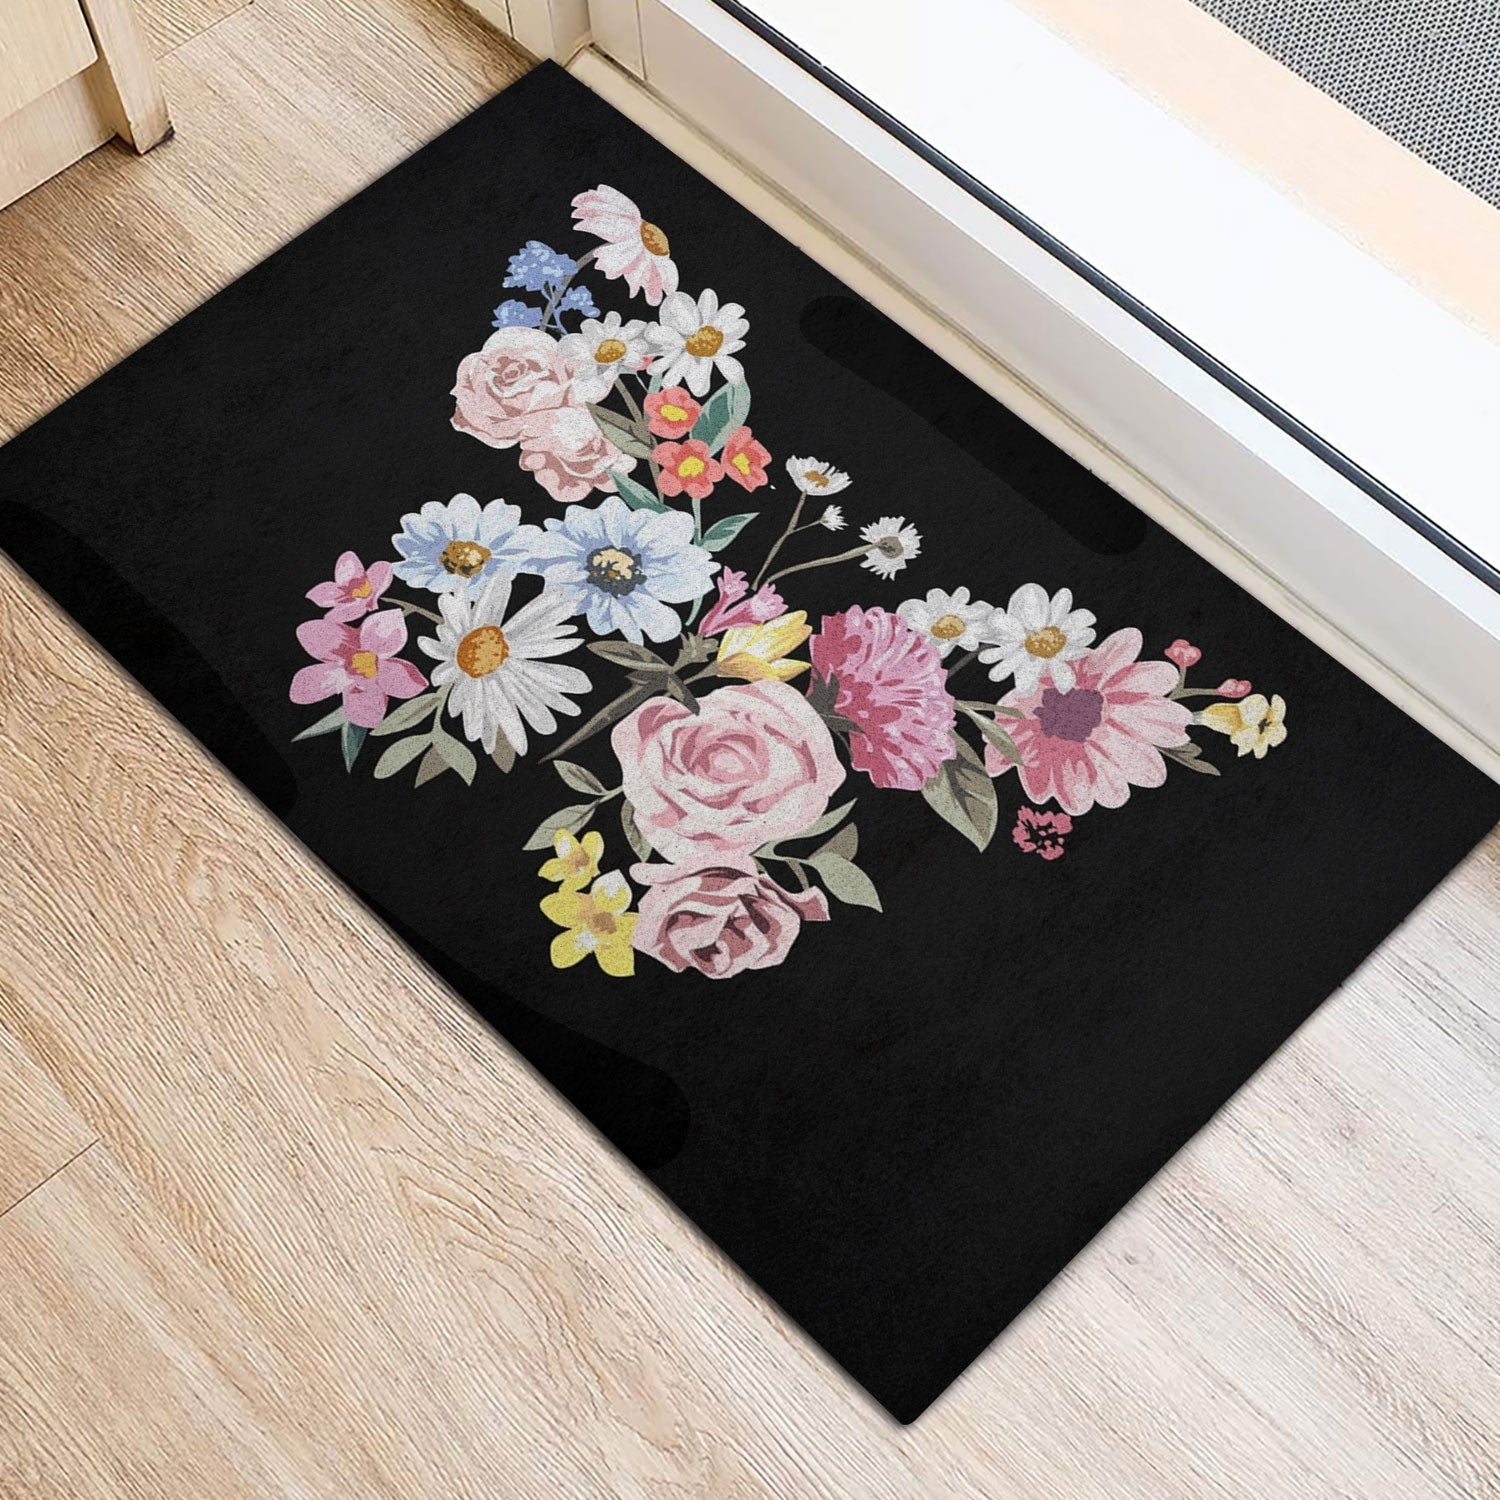 antcreptson Butterfly Colorful Monarch Butterflies Shades Welcome Outdoor Door Mat, Indoor Entrance Non-Slip Doormats, Outside Patio PVC Rug Pad